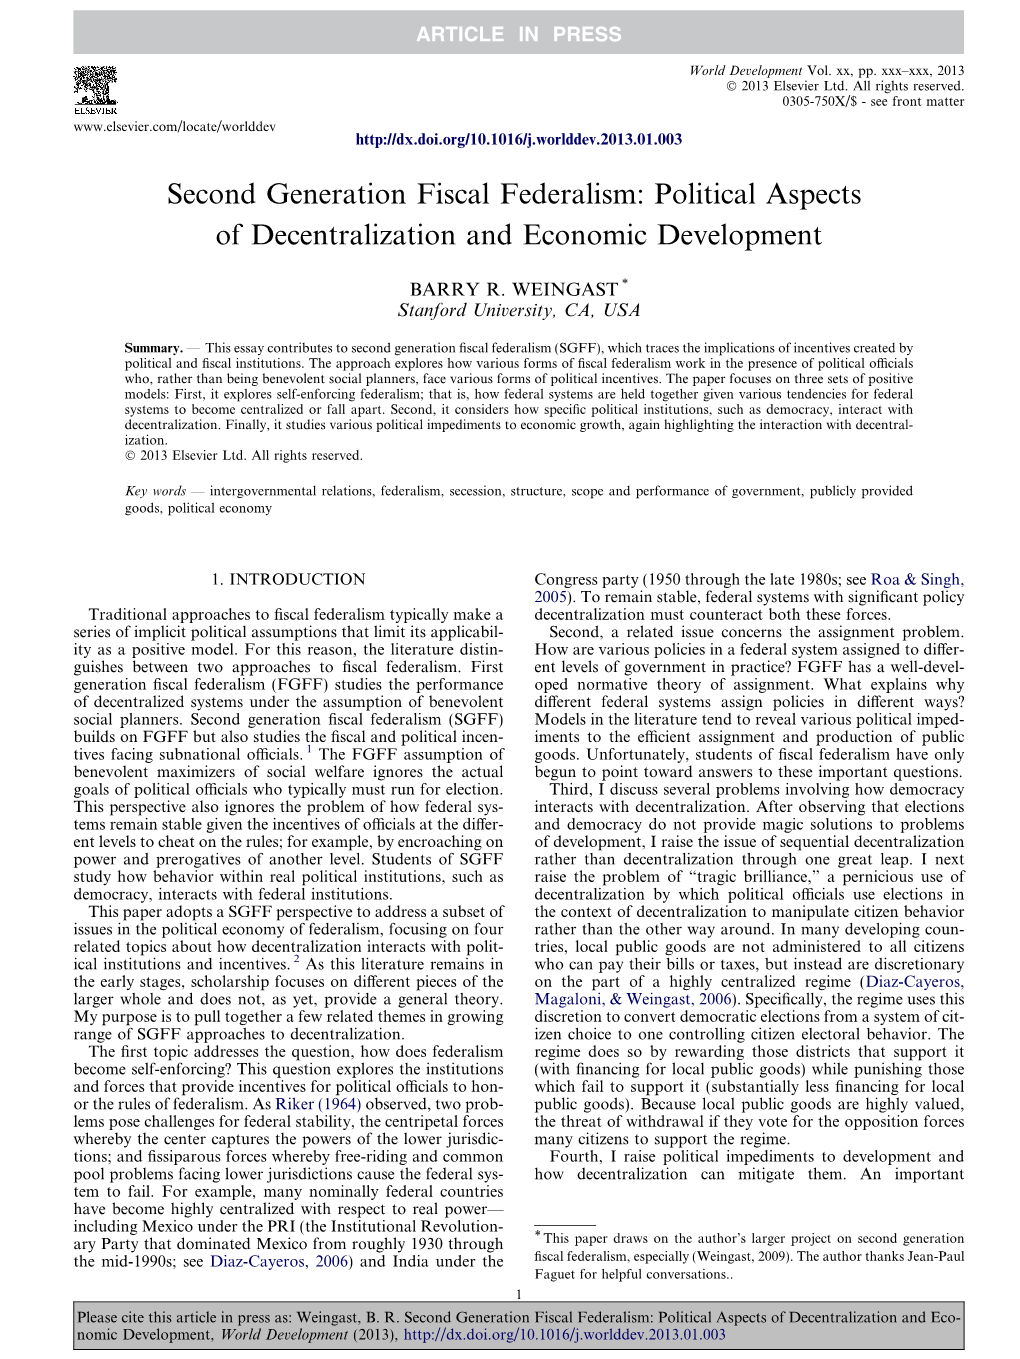 Second Generation Fiscal Federalism: Political Aspects of Decentralization and Economic Development